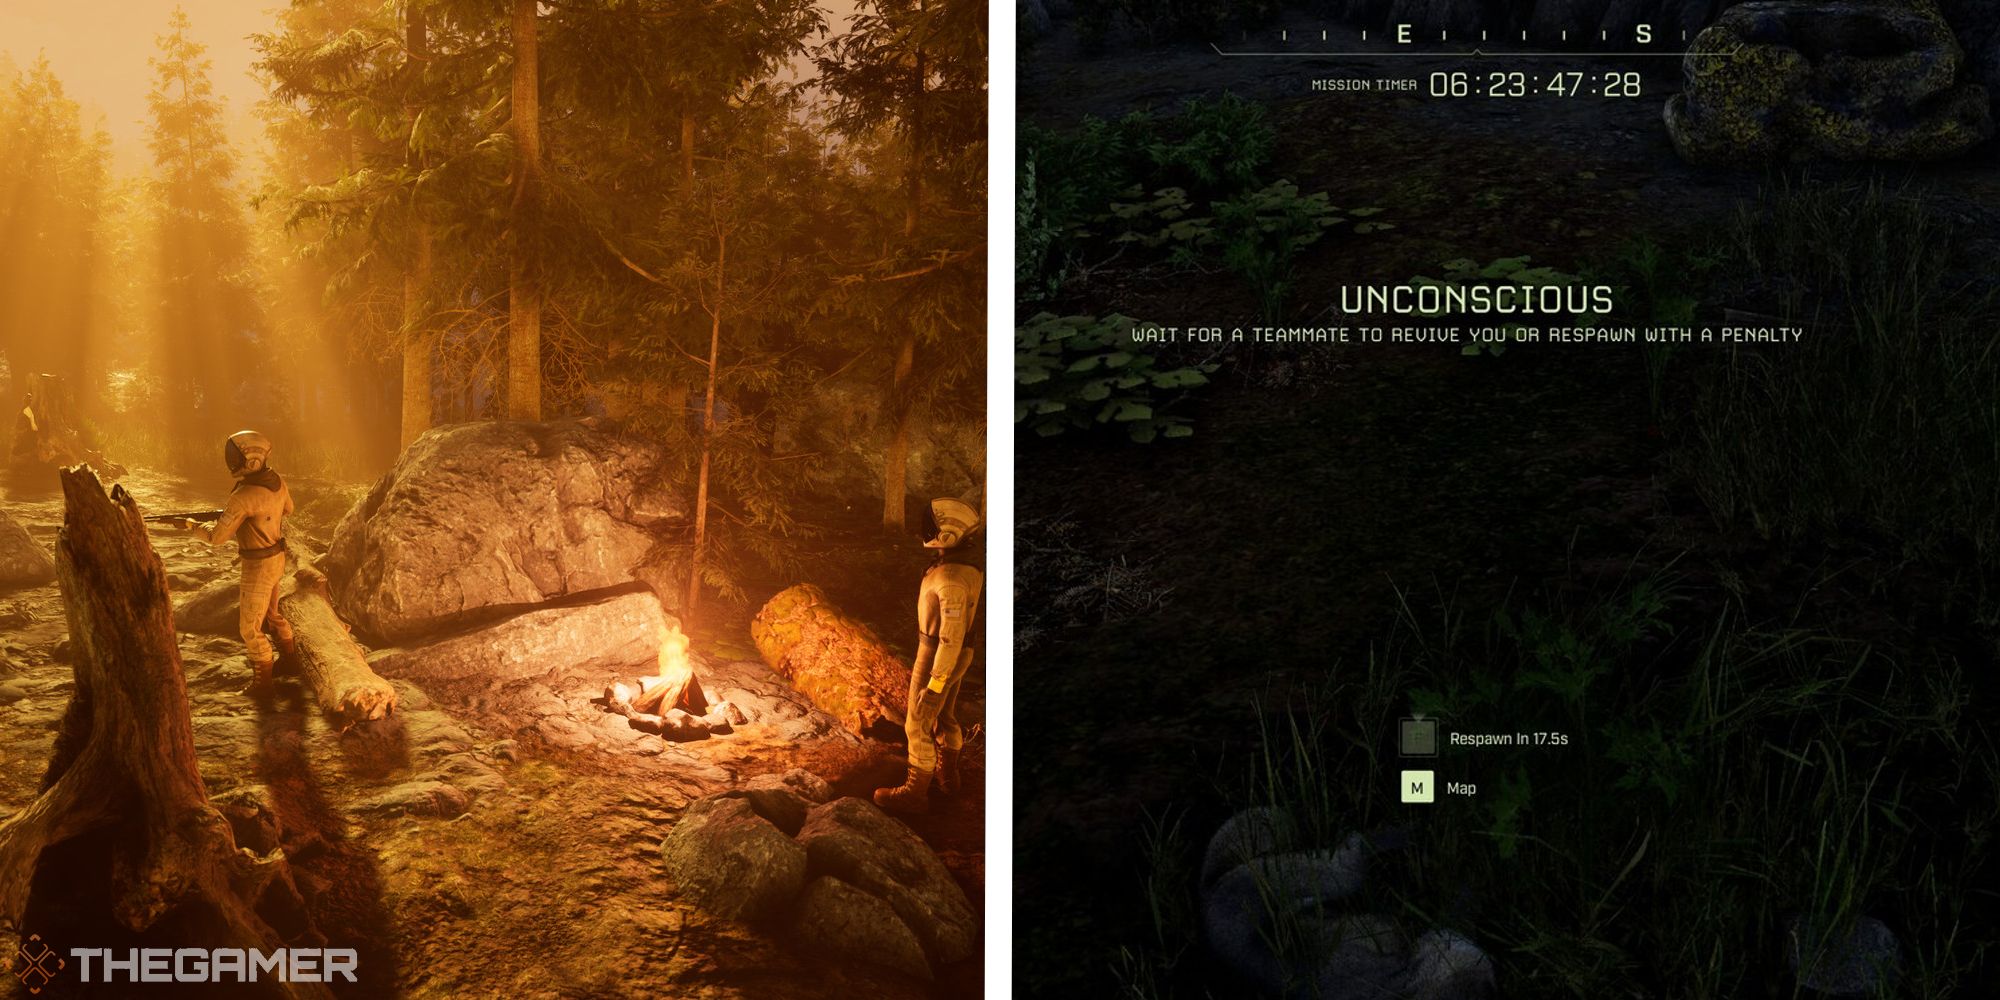 image of players around campfire next to image of unconscious screen